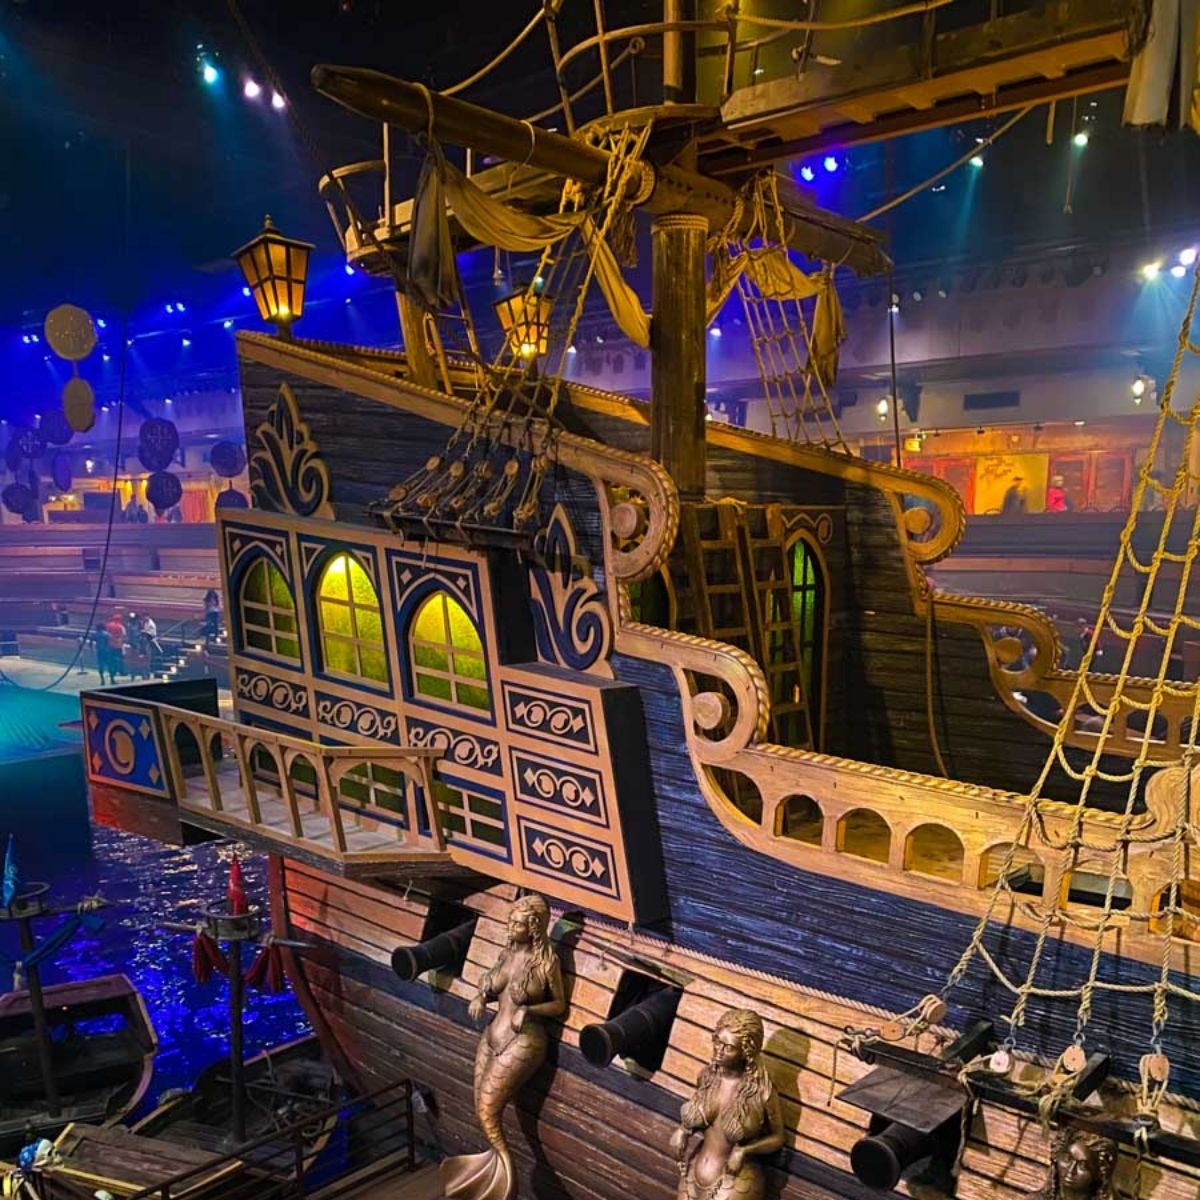 The pirate set for the Pirate's Voyage Dinner Show.